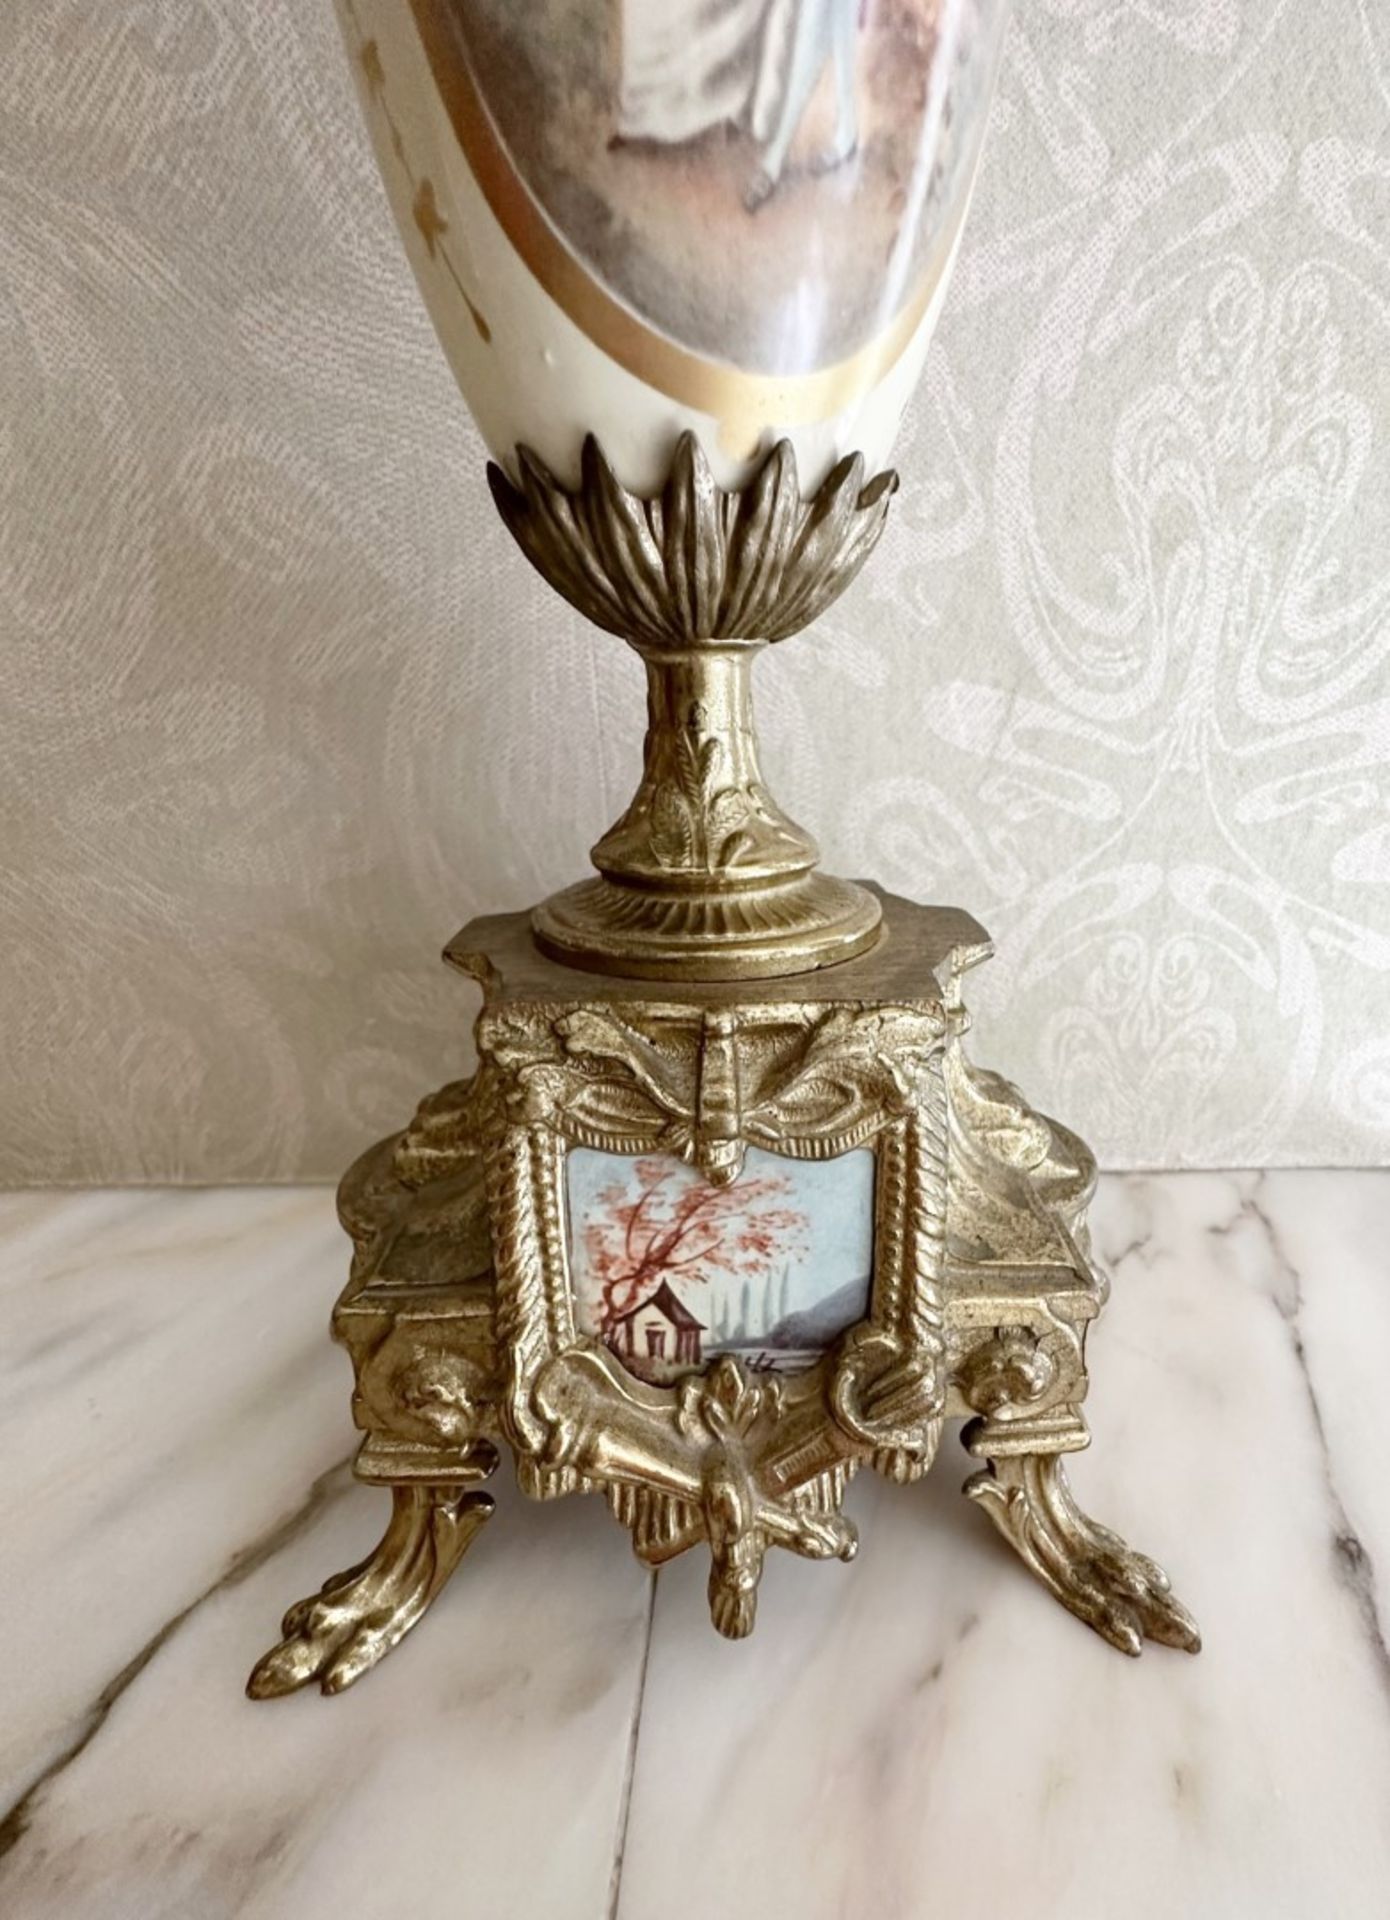 1 x Porcelain And Brass FRENCH SEVRES Vase/Jar. Hand Painted With Gold Leaf Design - Image 7 of 7